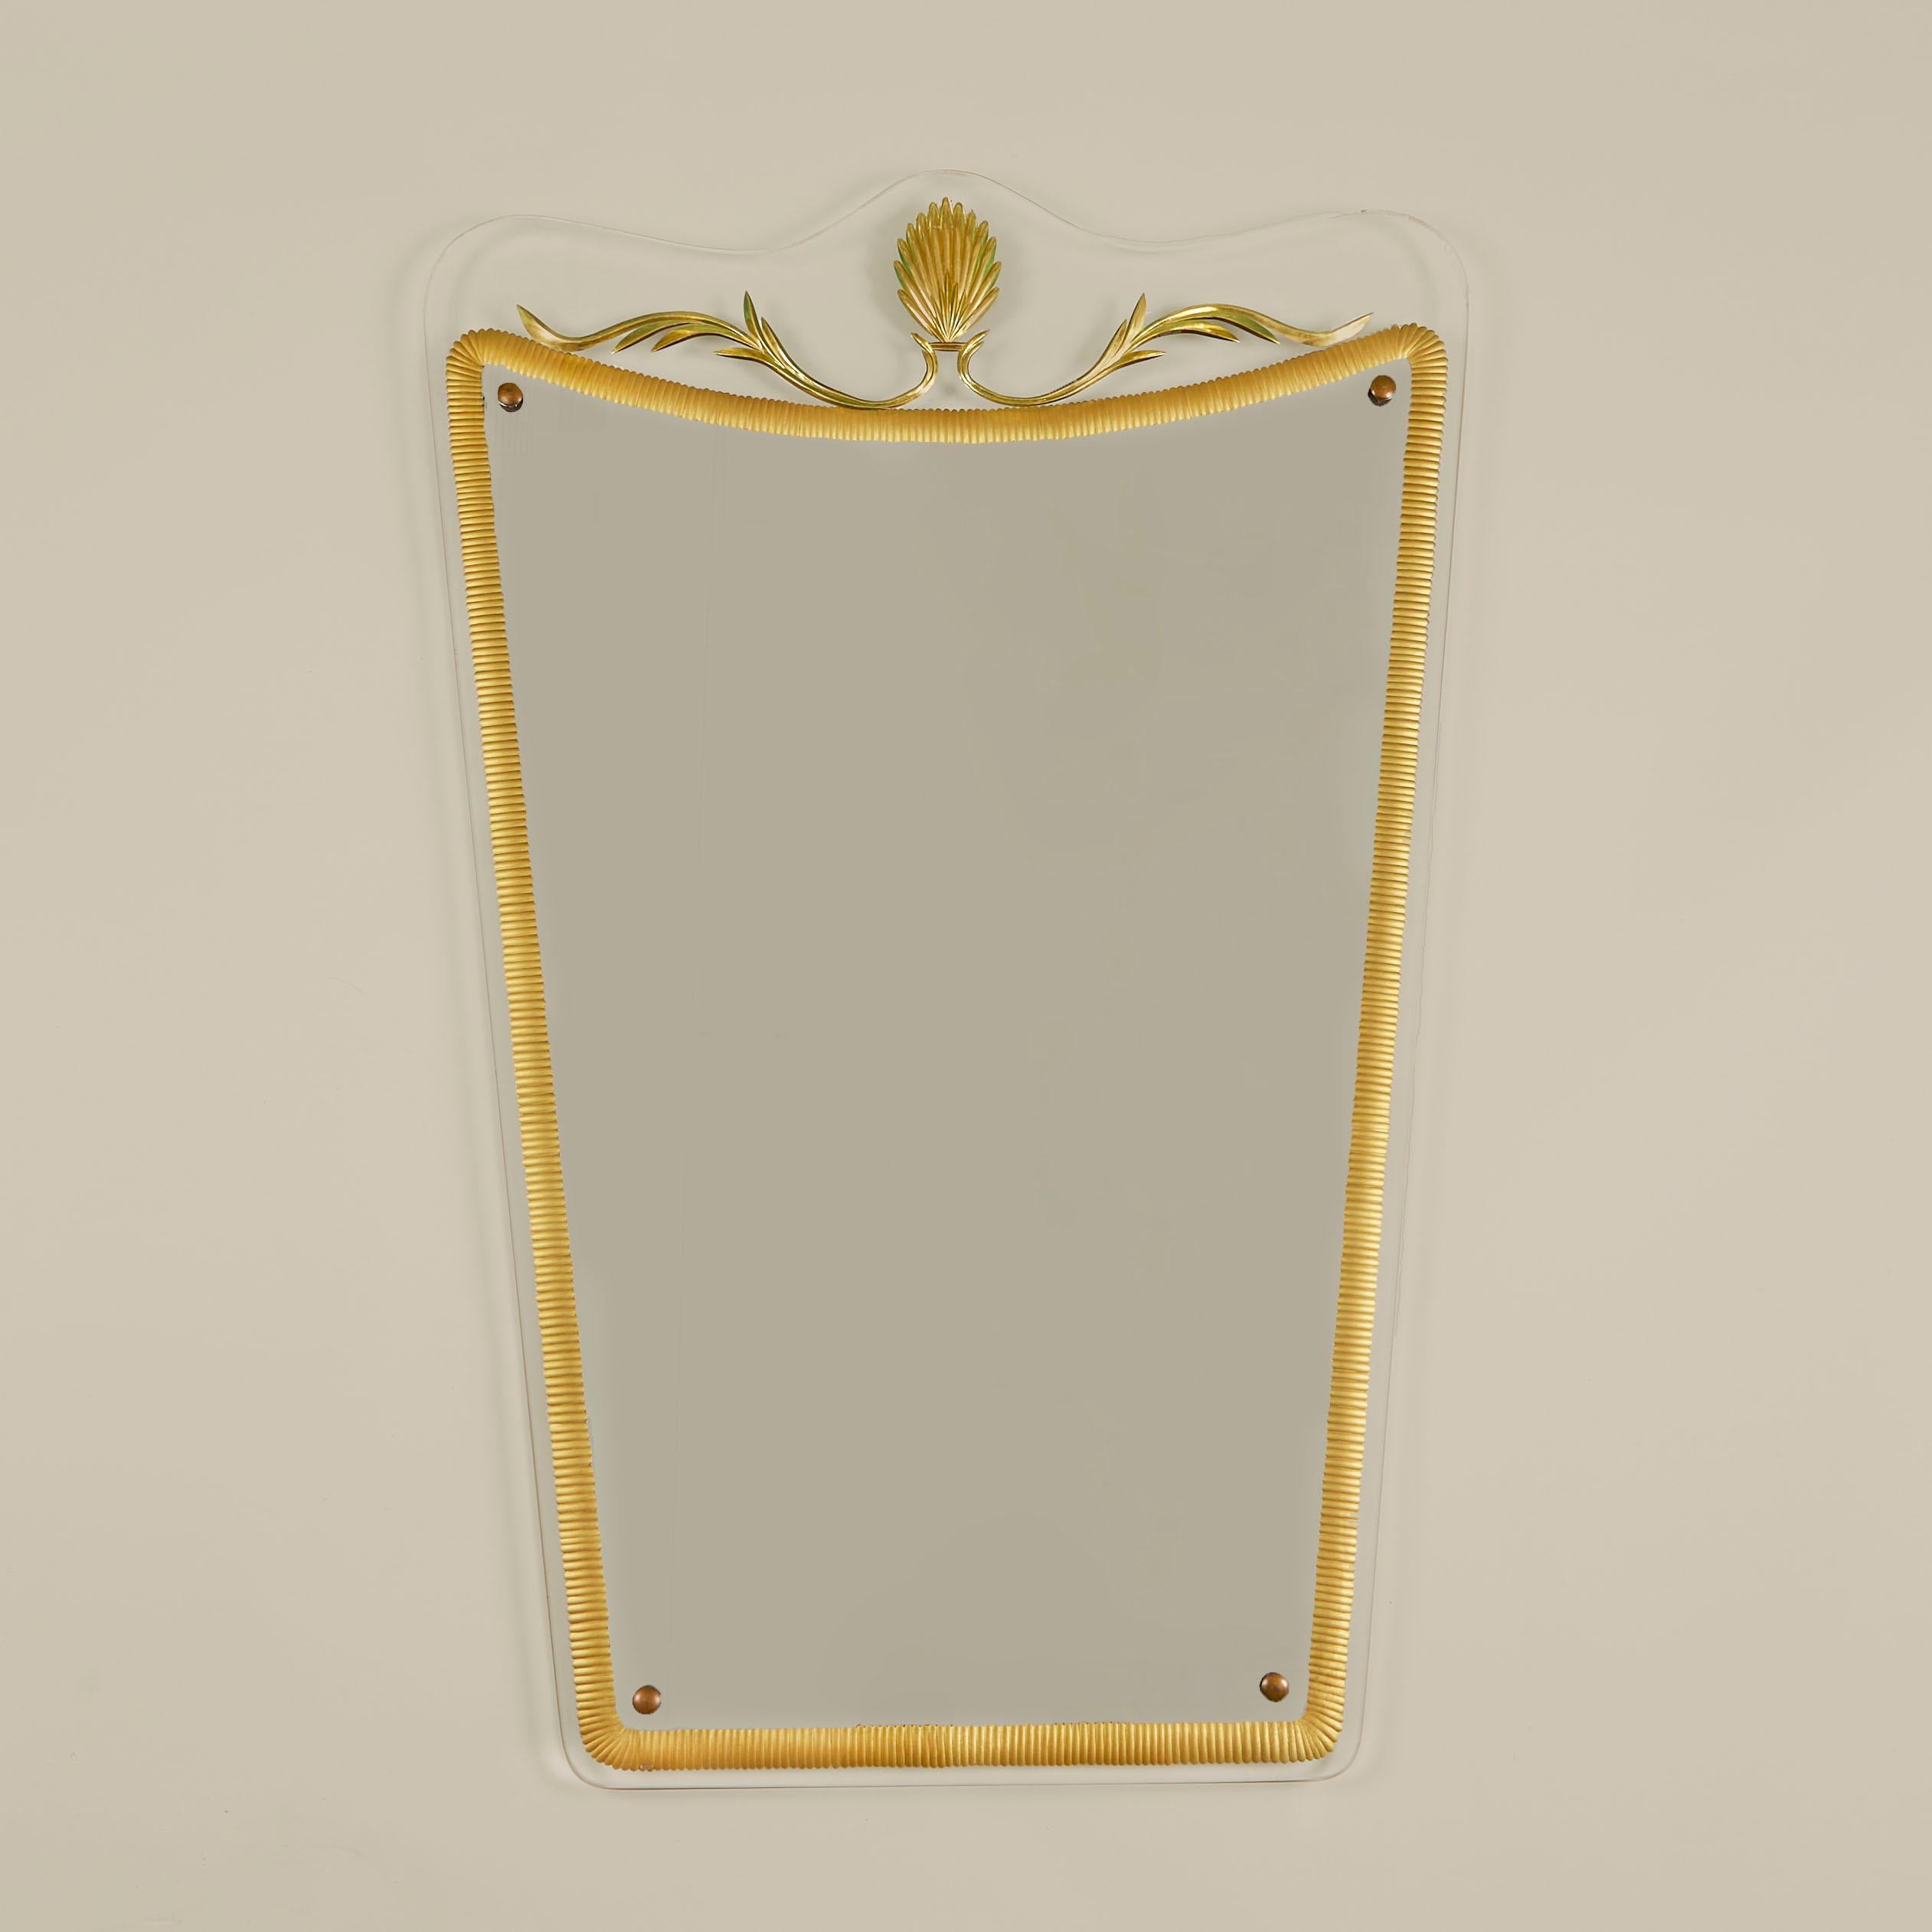 Chic Italian Murano glass shaped frame supports detailed gilt surround mirror with decorative swirl top.
